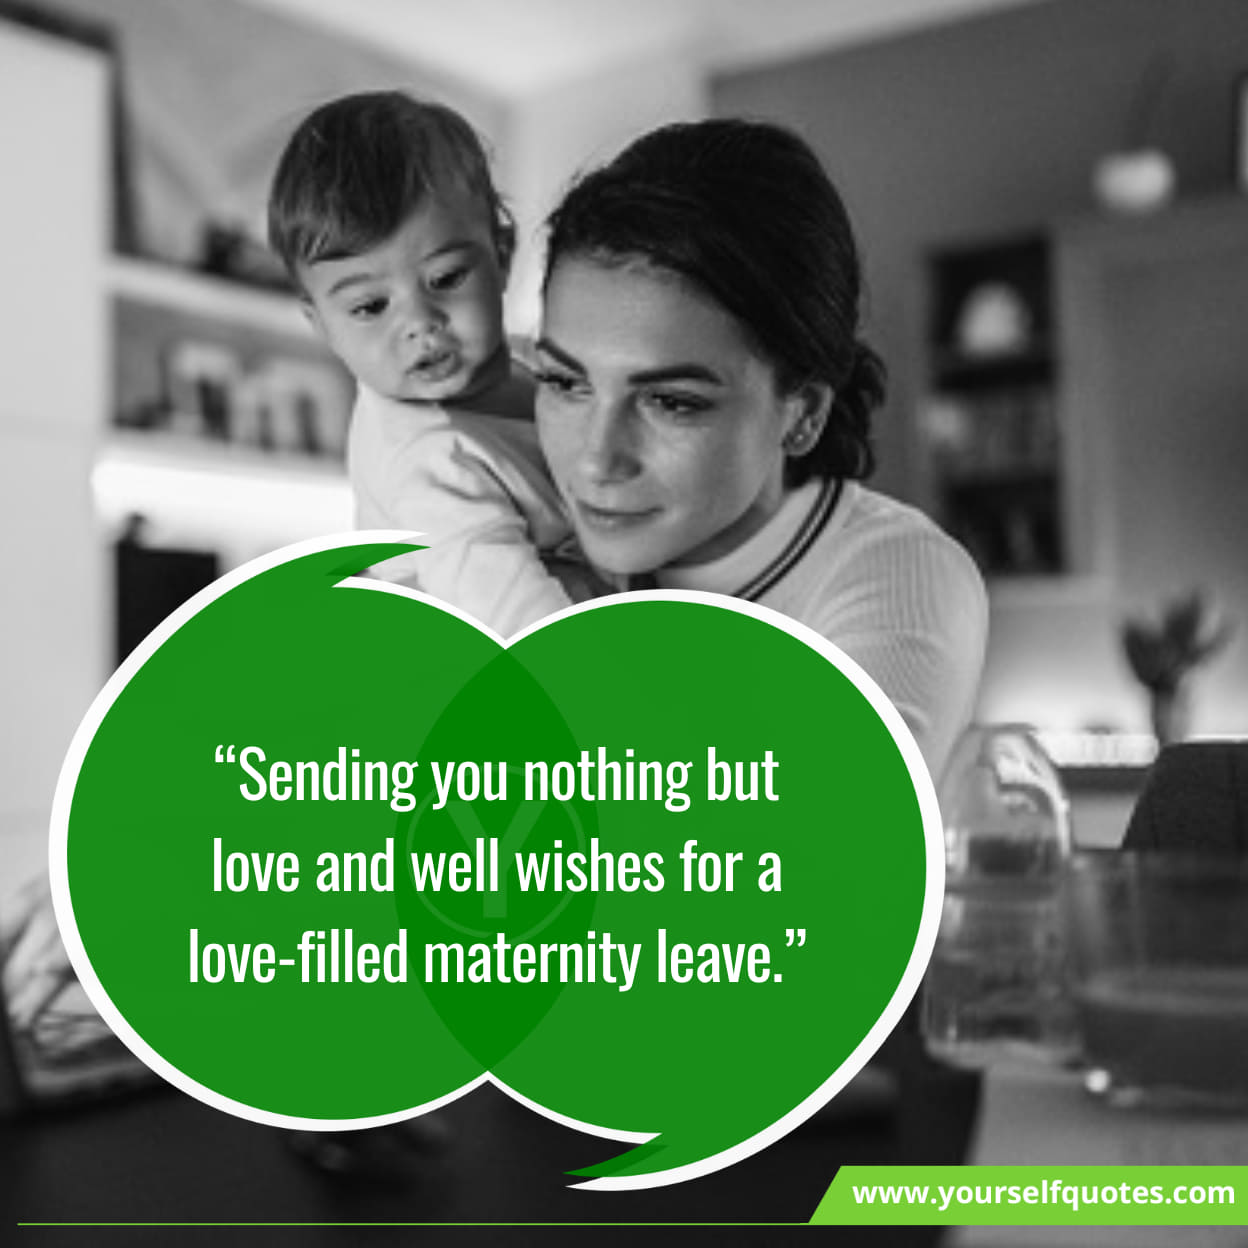 Heart Warming Maternity Leave Messages for Your